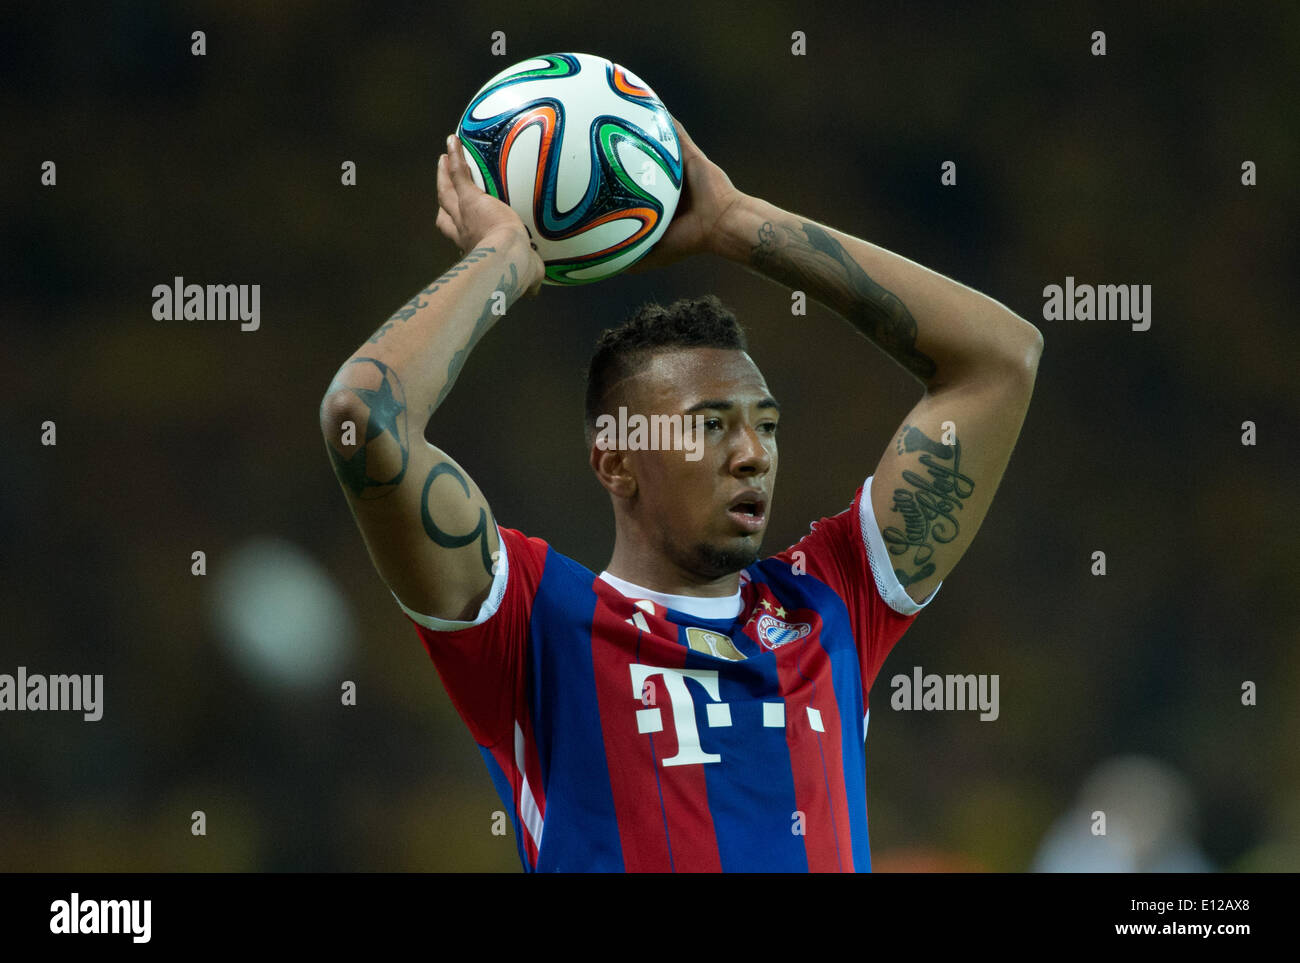 Berlin, Germany. 17th May, 2014. Munich's Jerome Boateng in action during the DFB Cup final between Borussia Dortmund and FC Bayern Munich at the Olympic Stadium in Berlin, Germany, 17 May 2014. Photo: Soeren Stache/dpa/Alamy Live News Stock Photo